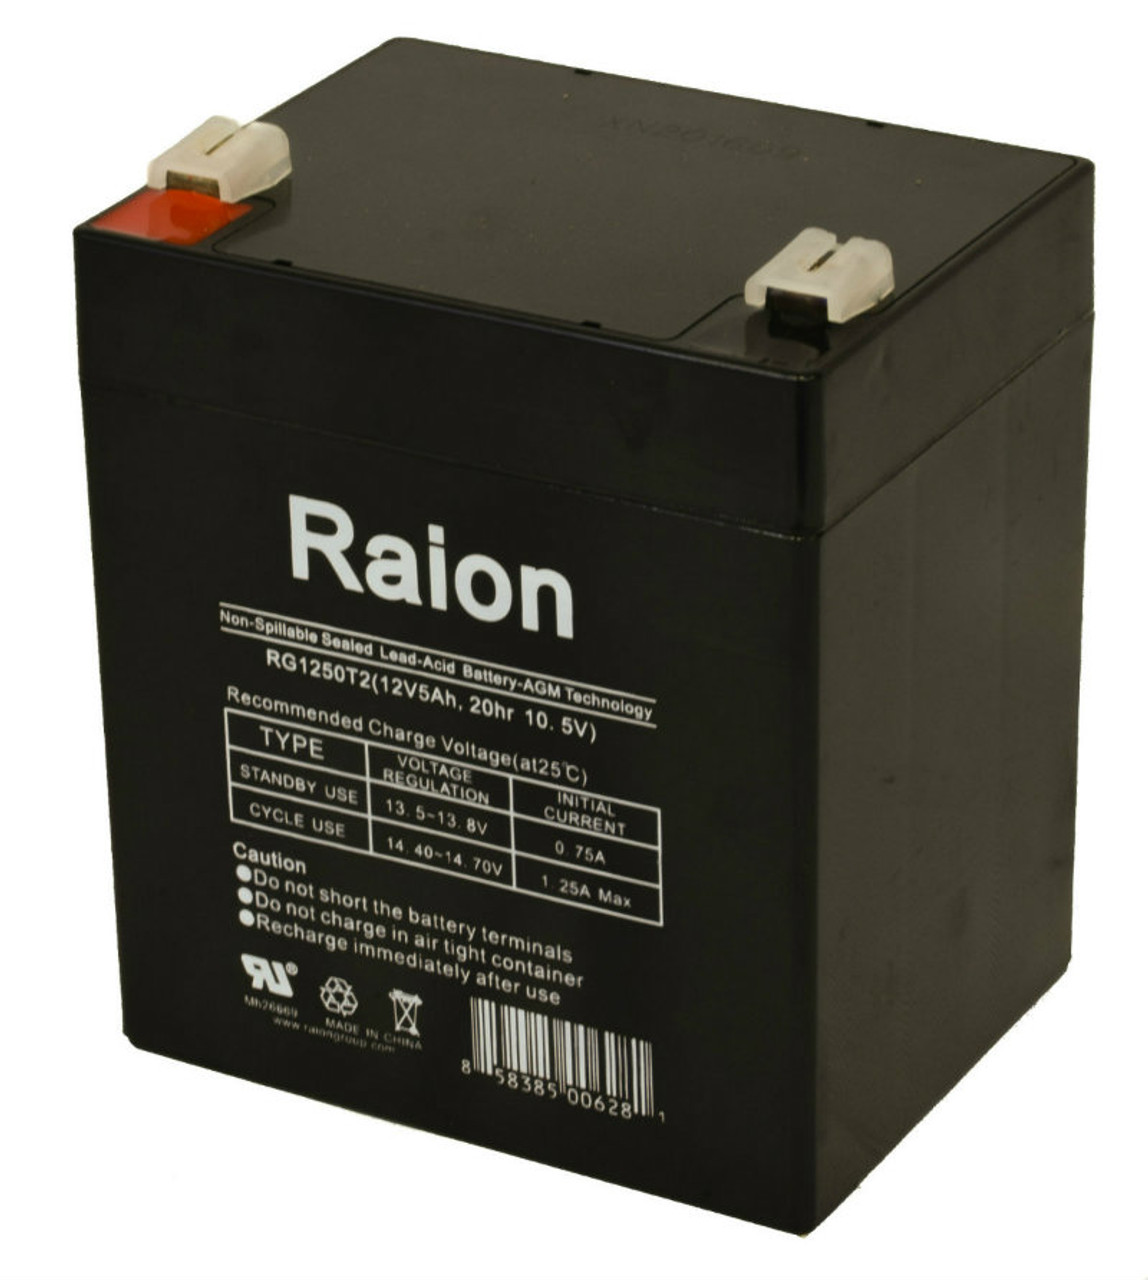 Raion Power RG1250T1 Replacement Battery for Expocell P212/50